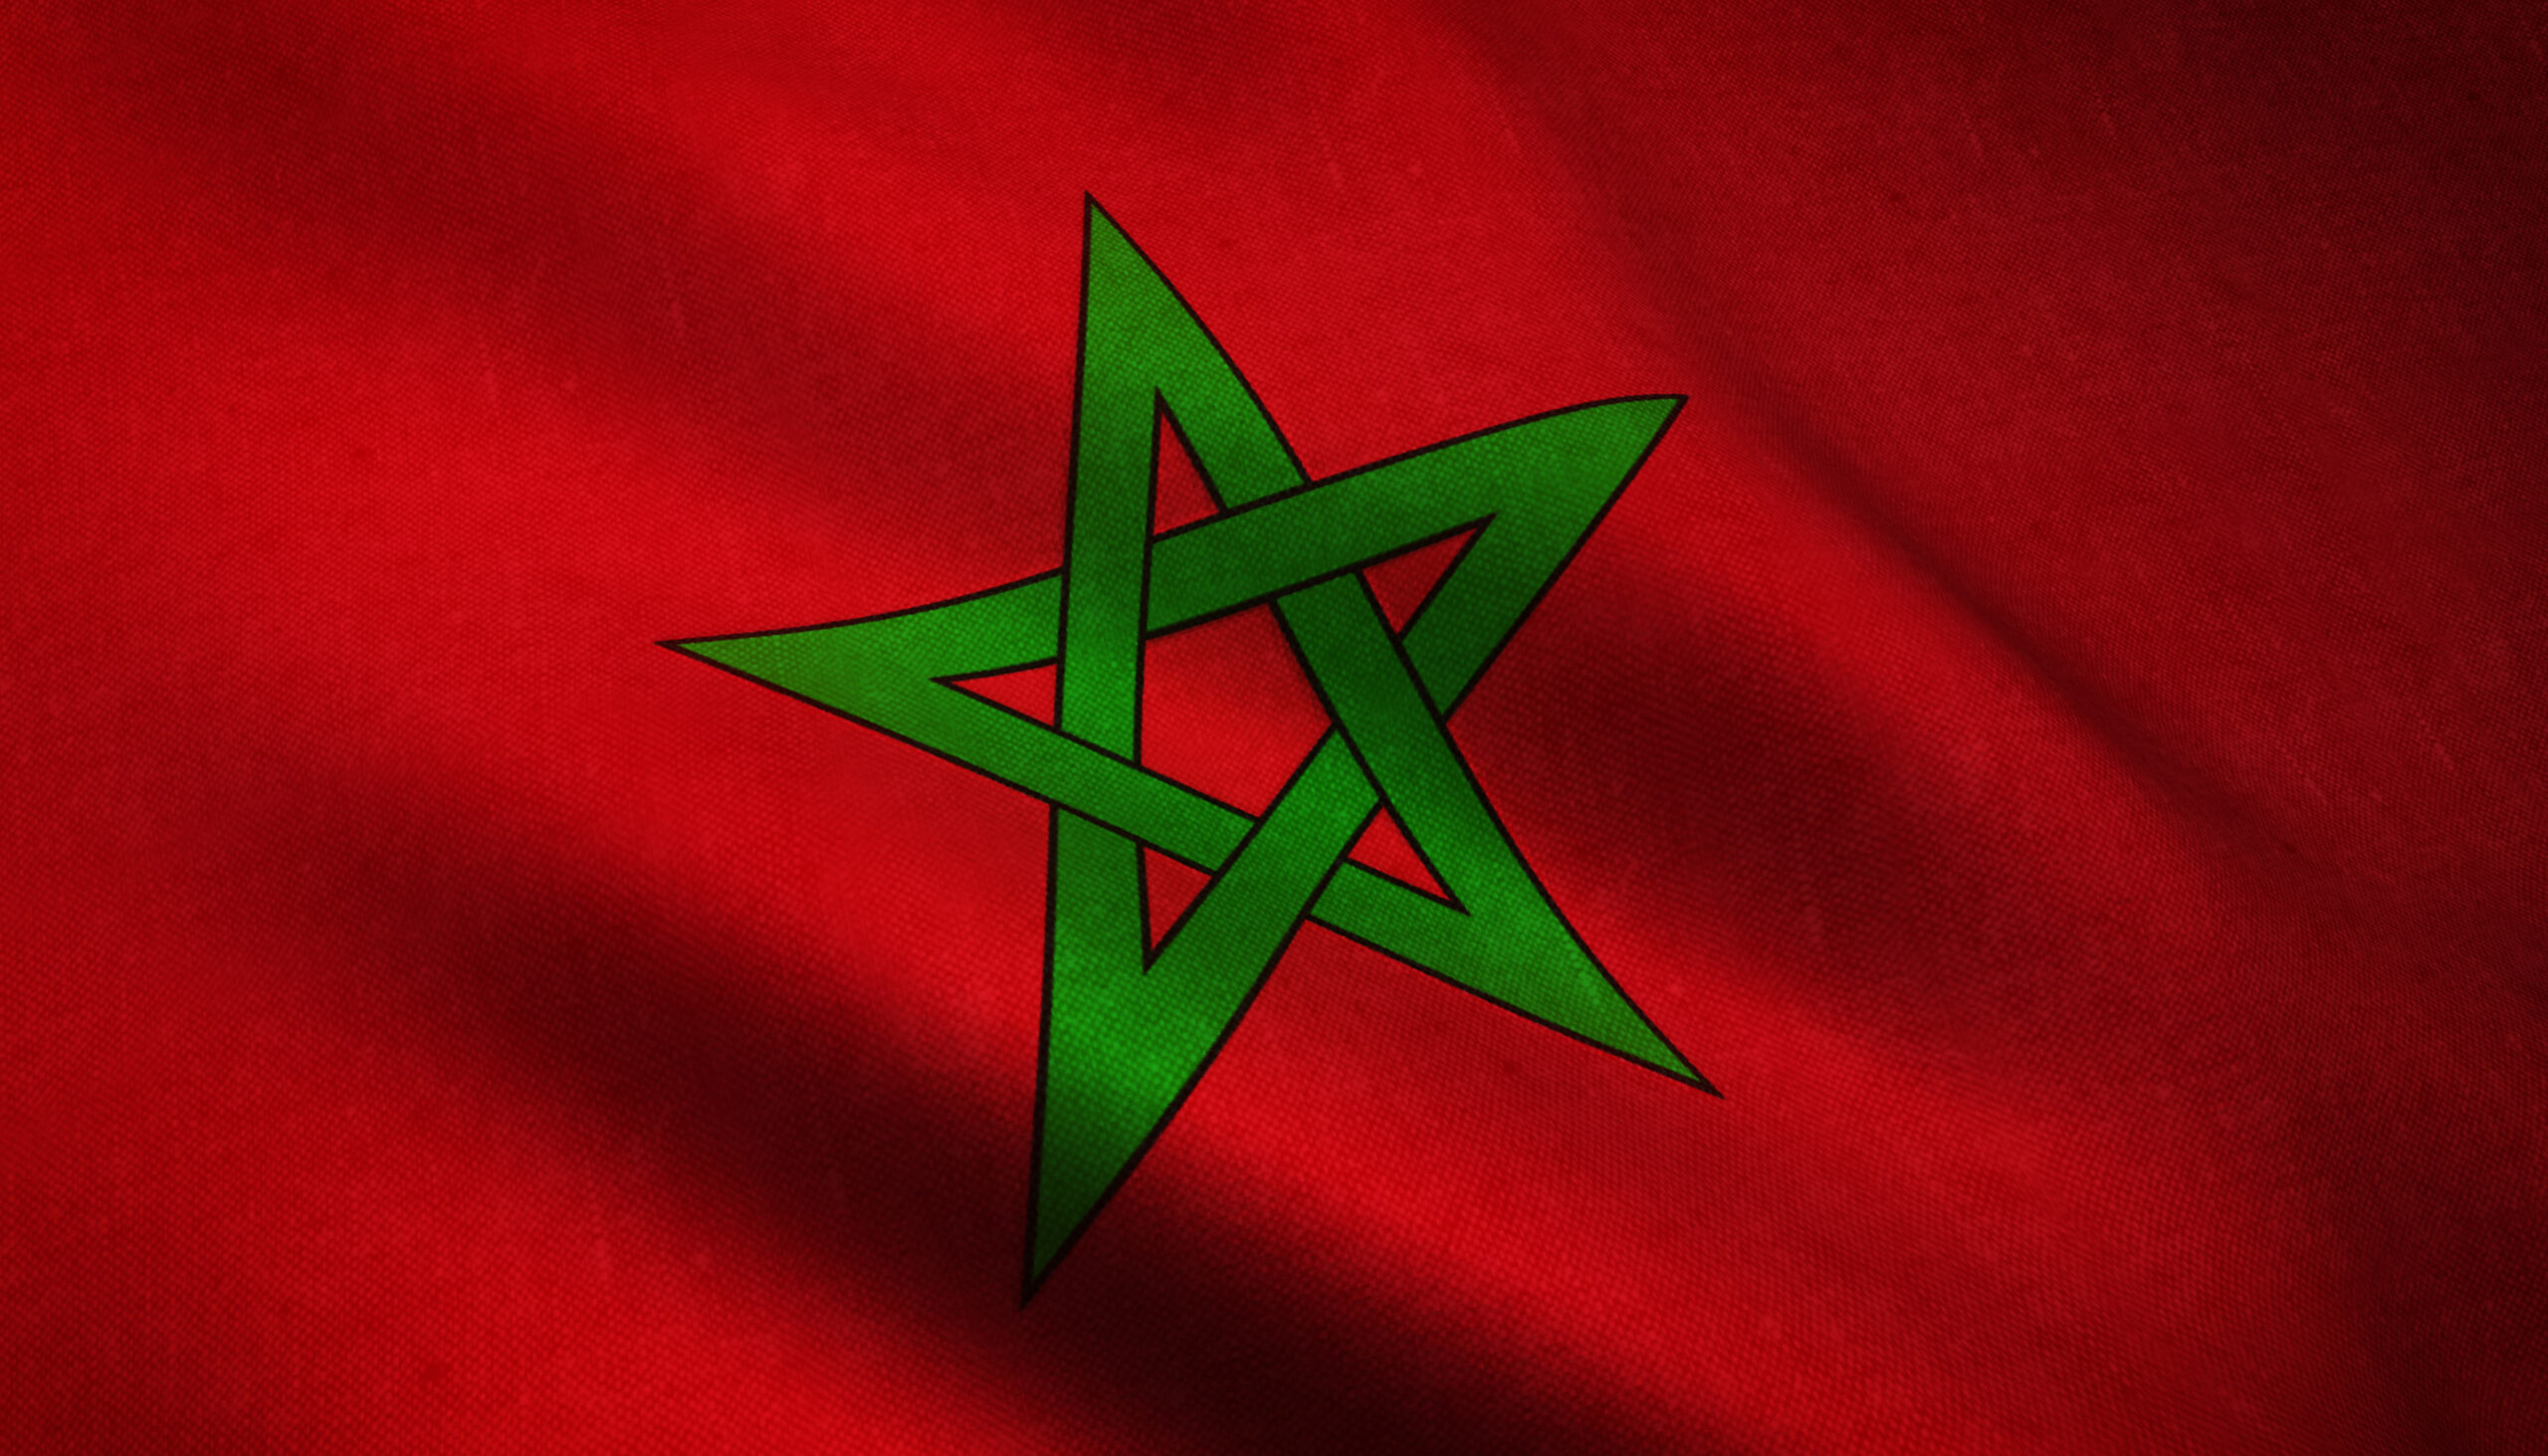 The Foundation BFPE expresses deep condolences for the earthquake in Morocco